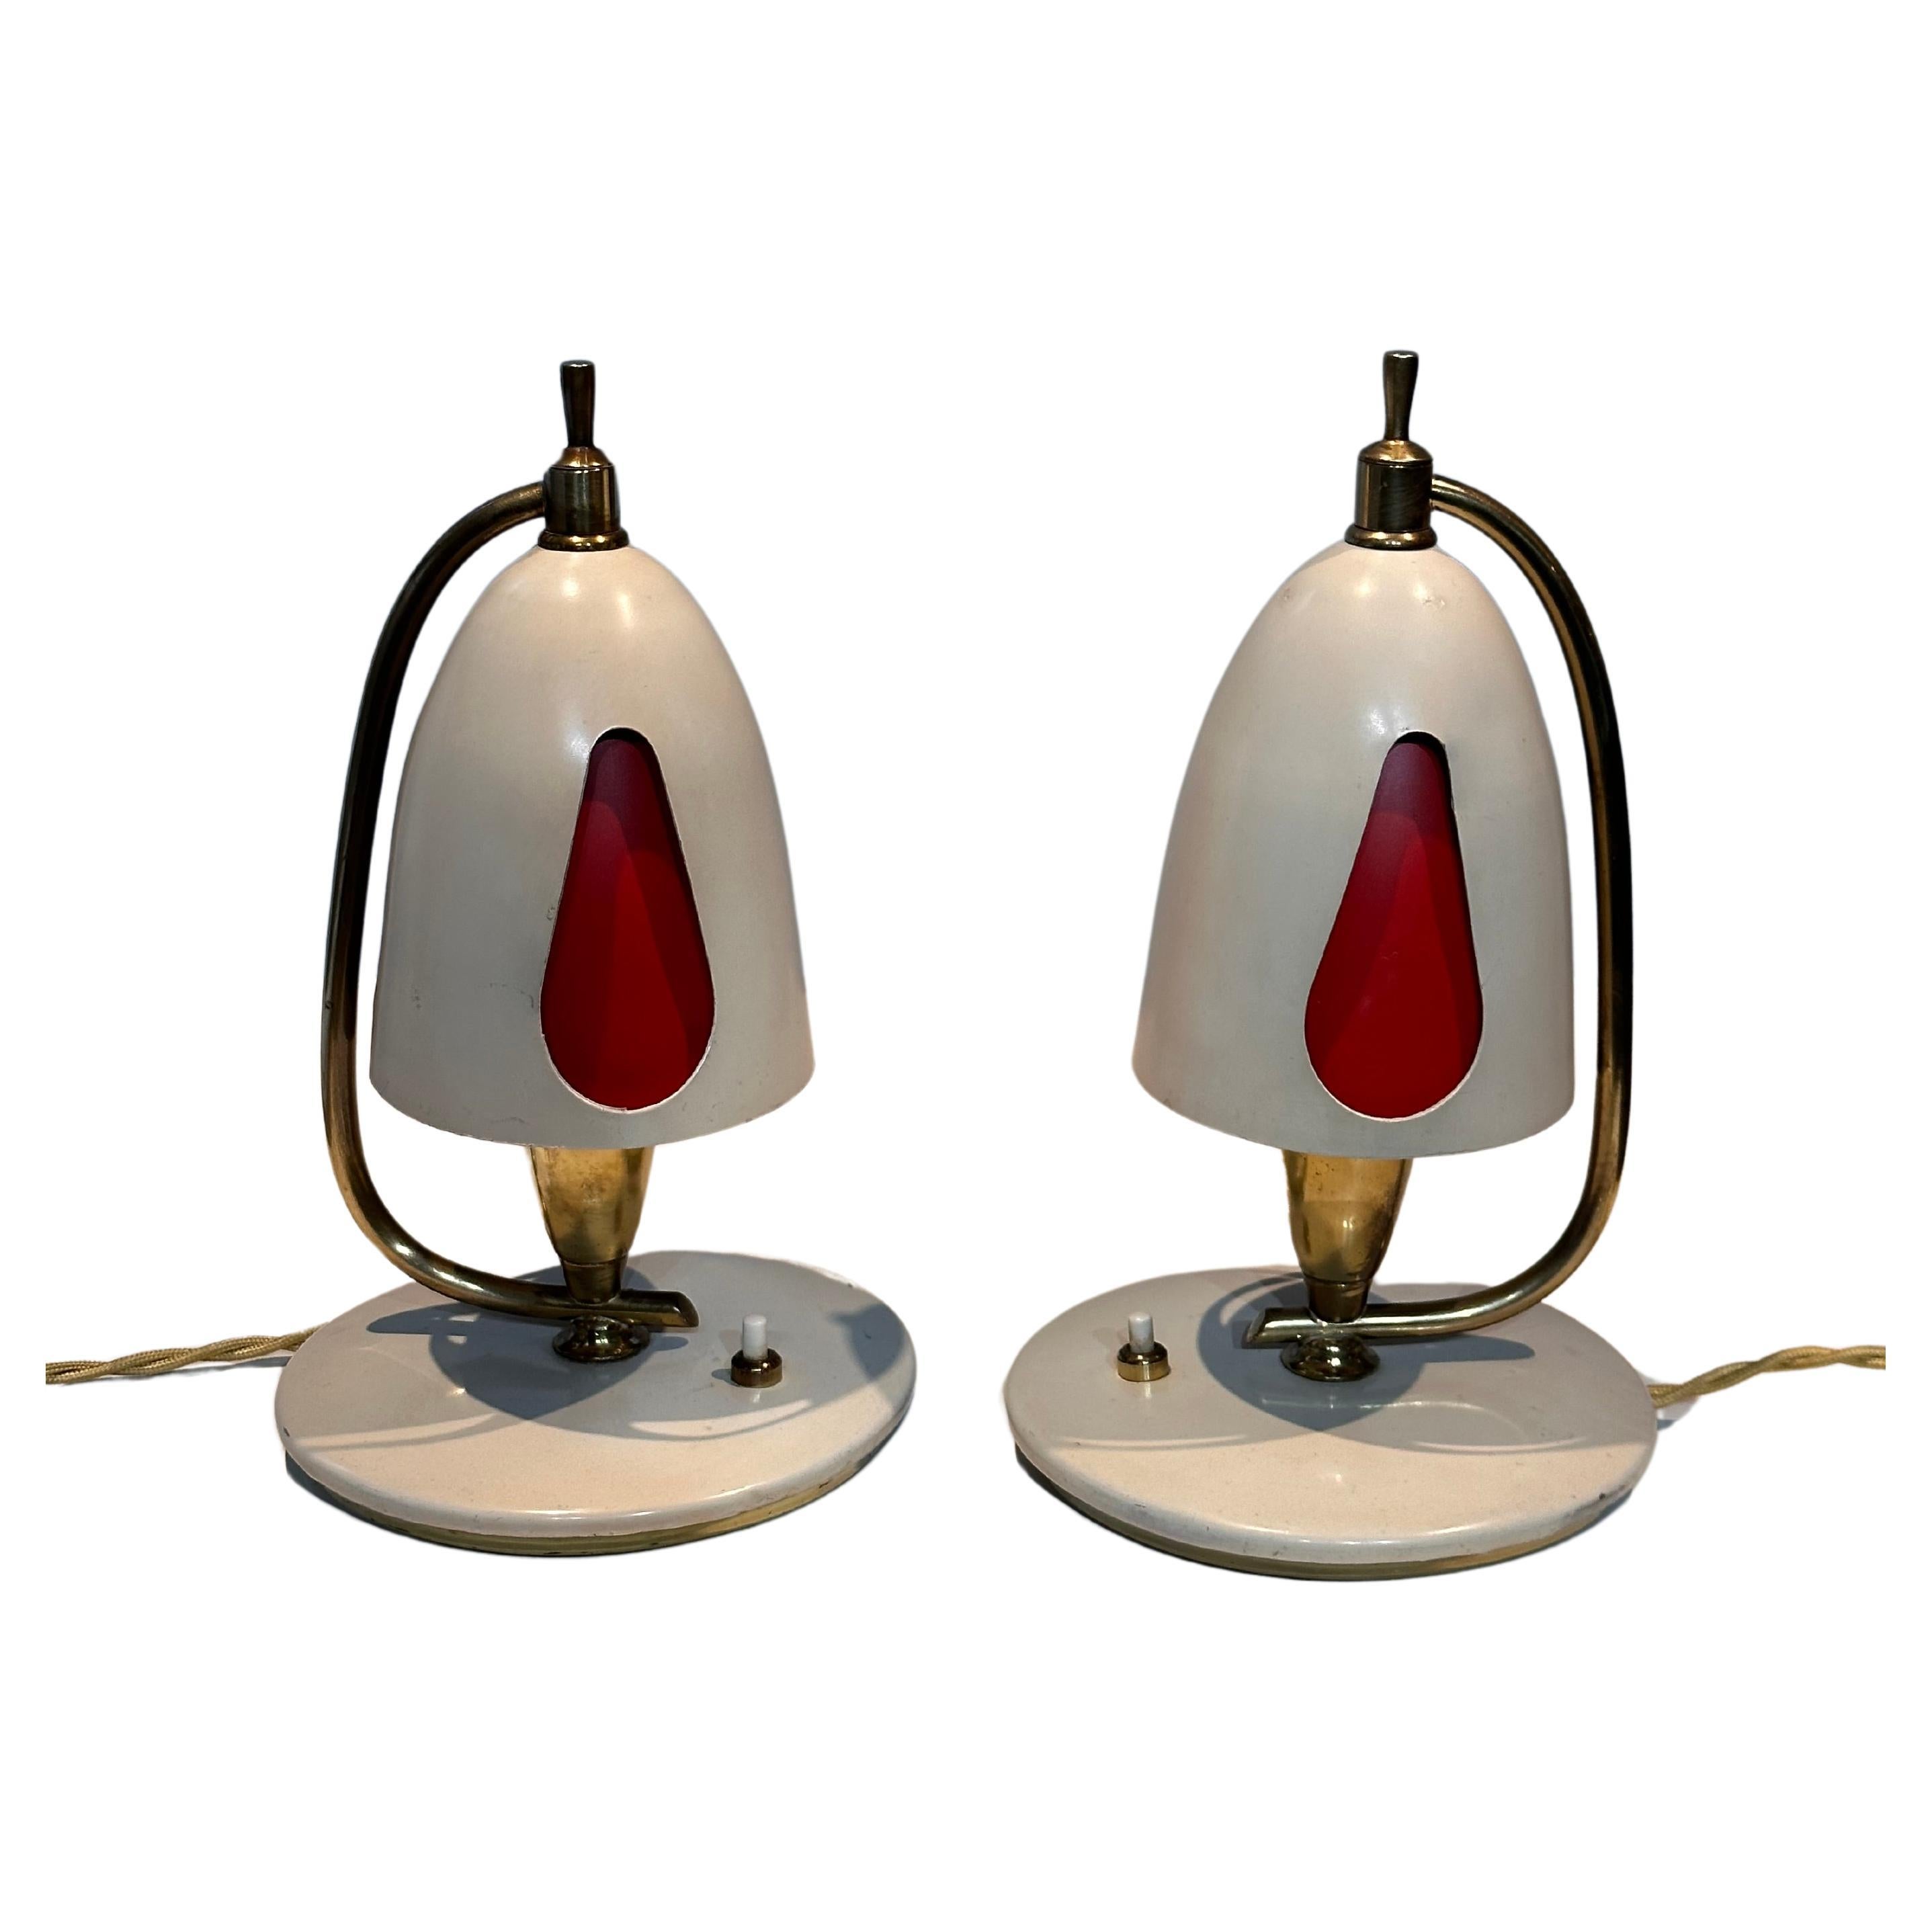 Angelo Lelli for Arredoluce. Pair of Iconic Table Lamps with Double Lampshade